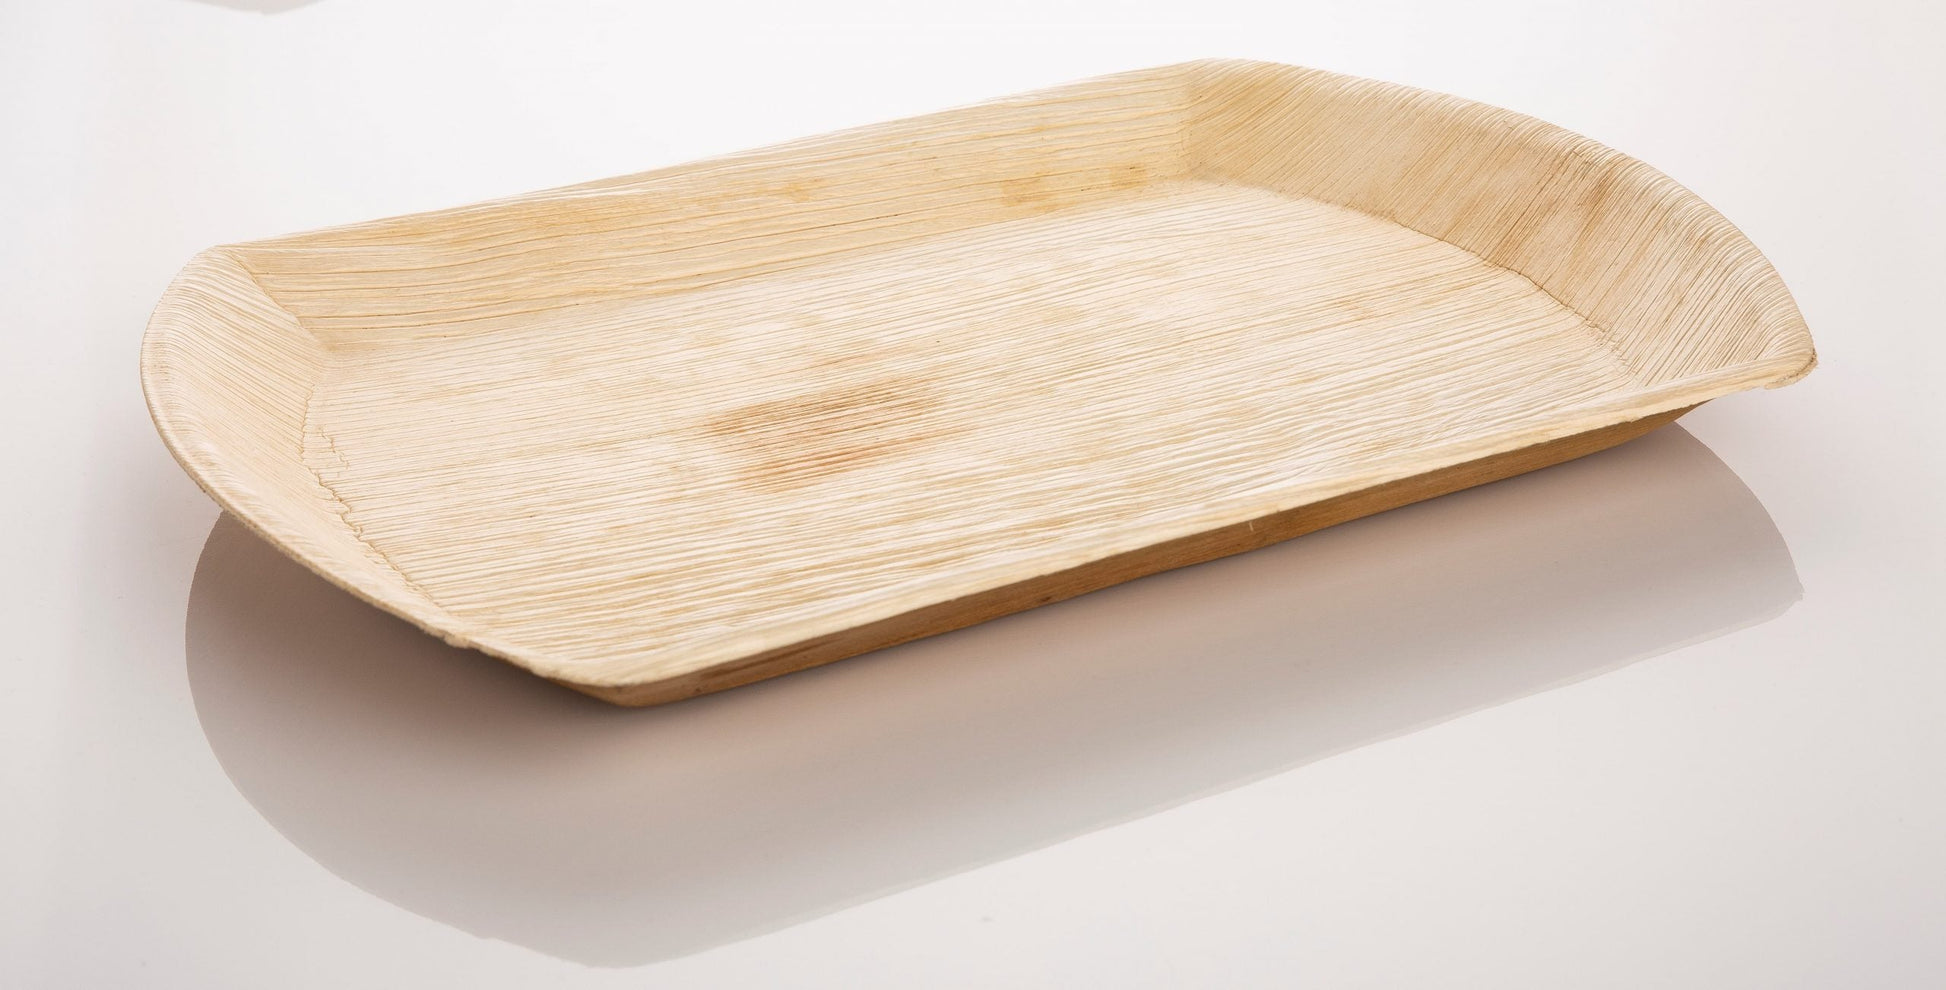 palm leaf tray is perfect as a serving tray